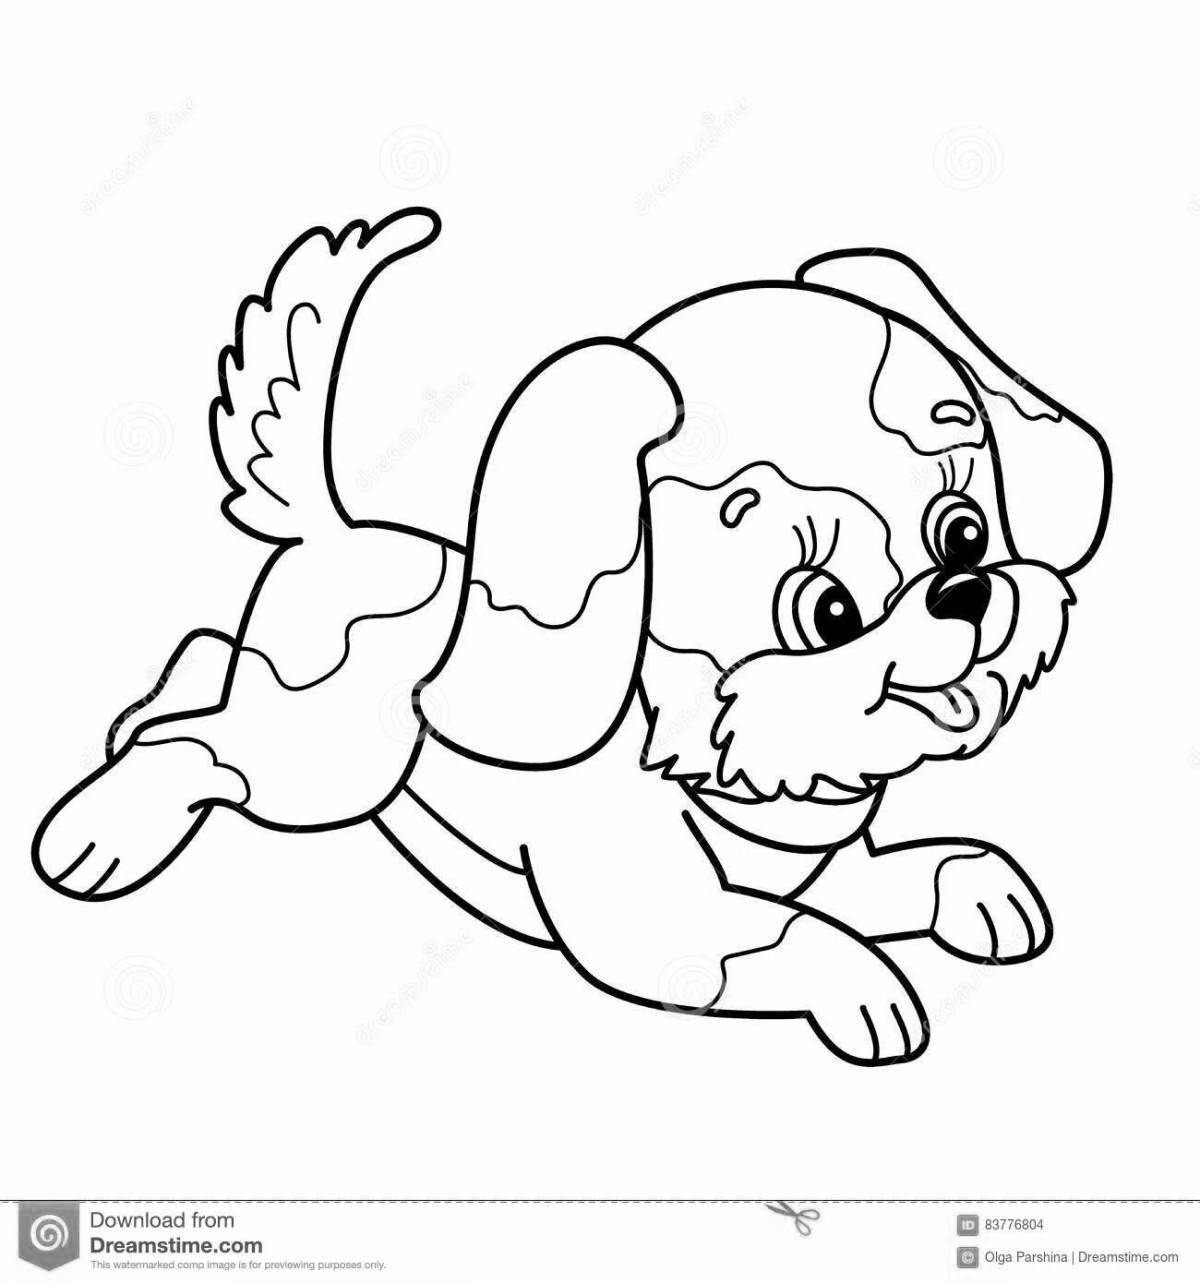 Attractive coloring page my puppy Michalkov for kids